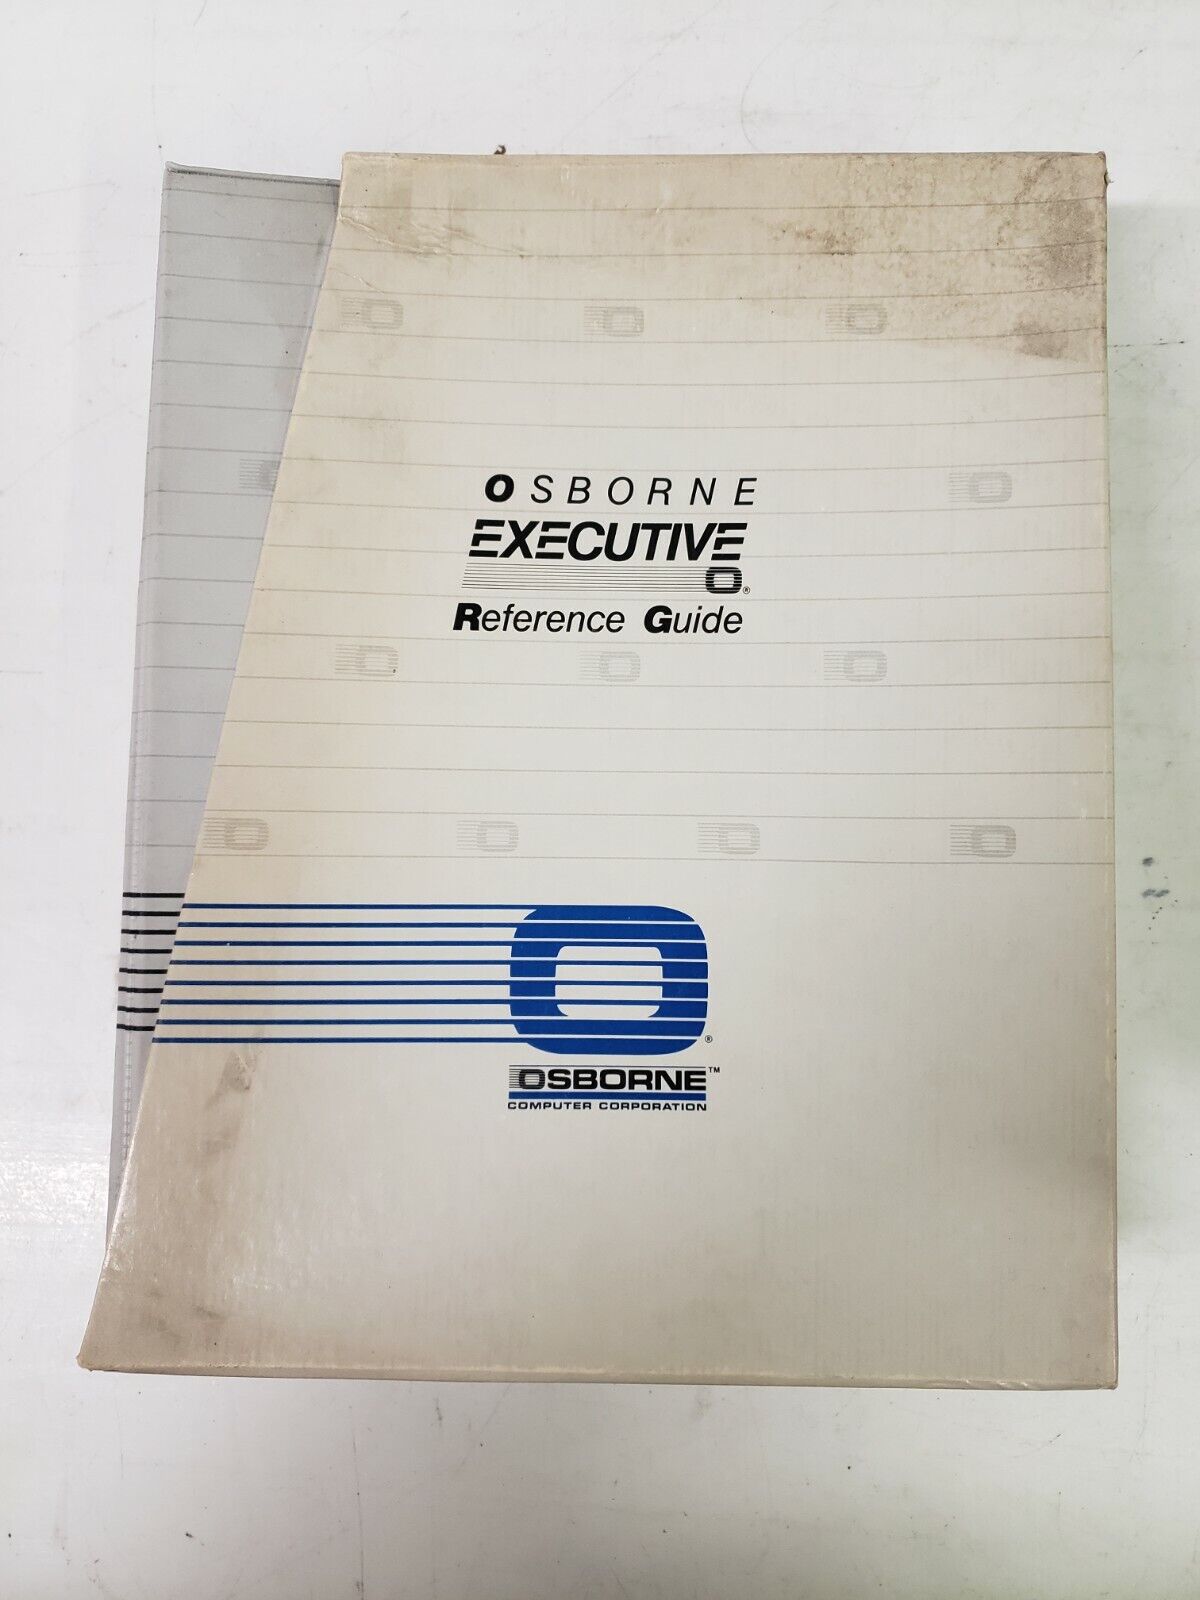 Vintage 1983 Osborne executive Reference Guide in good condition. 